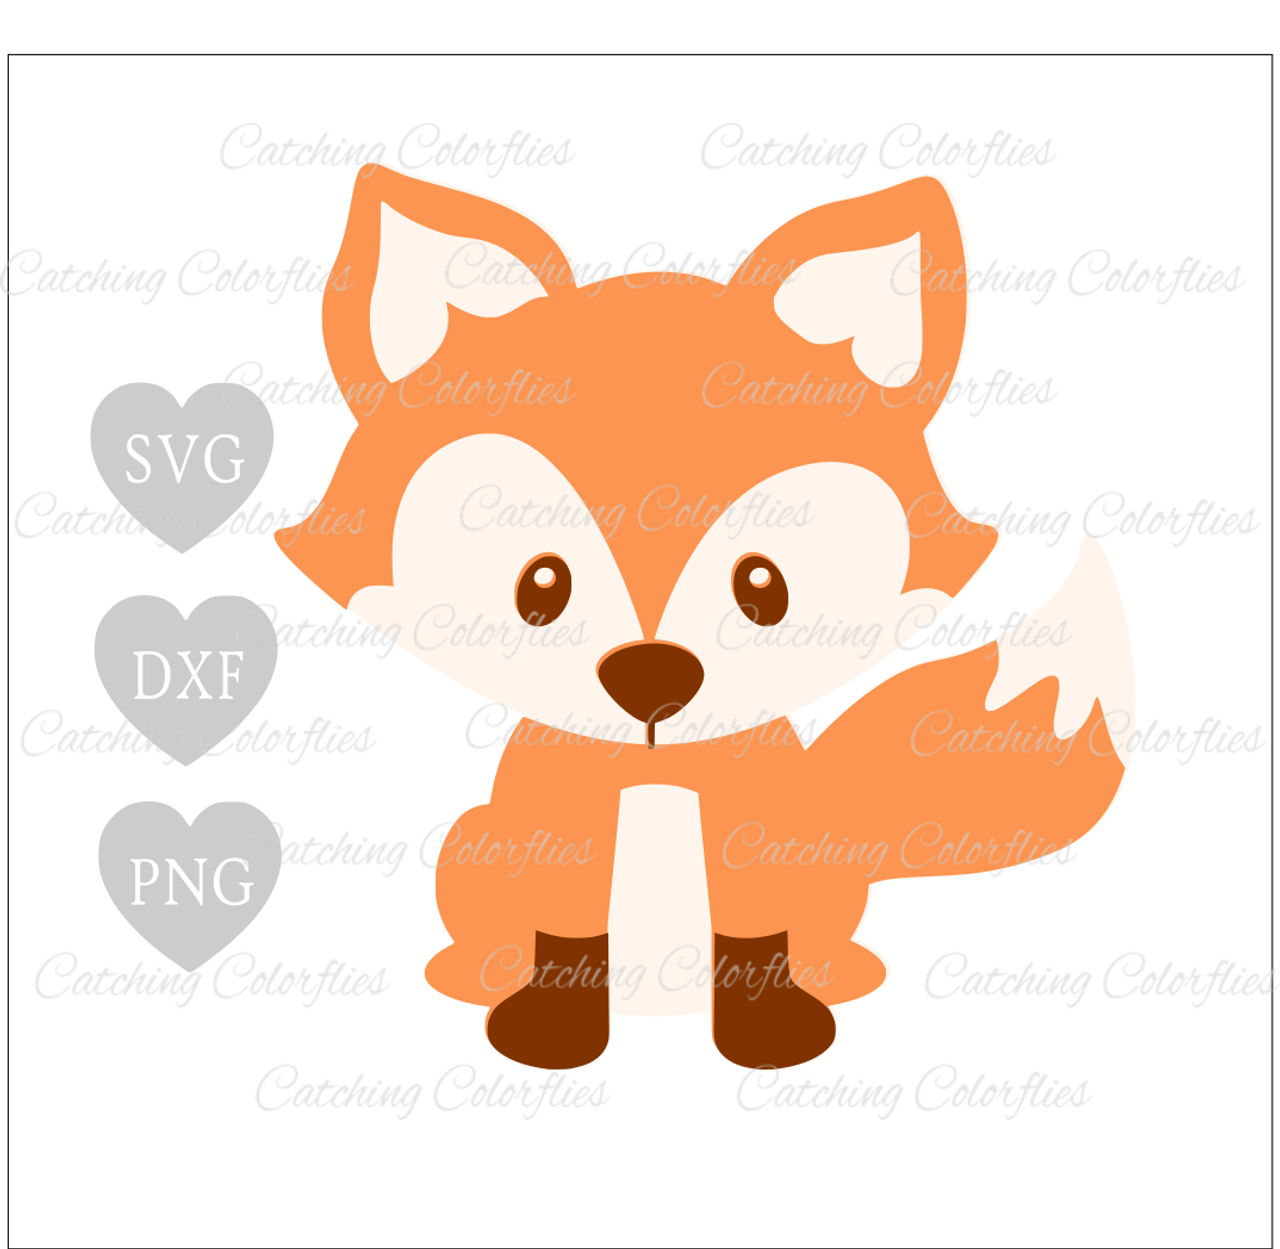 Download Cute Baby Fox SVG - Catching Colorlfies